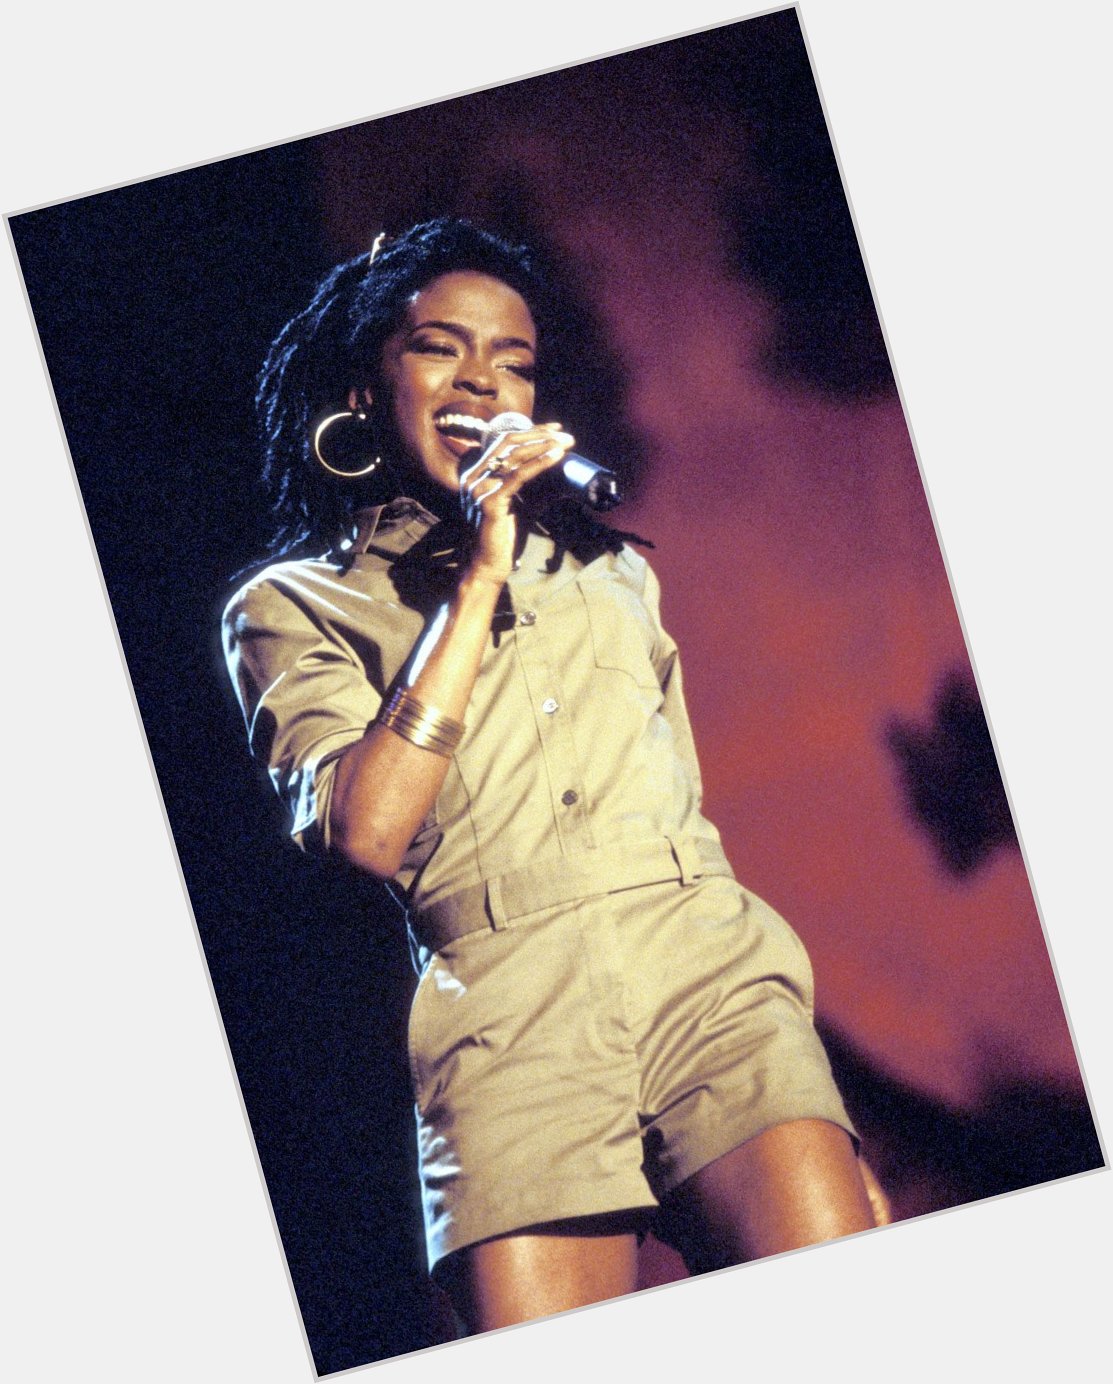 Happy 46th birthday Ms. Lauryn Hill

What are your favorite Lauryn Hill tracks or verses? 